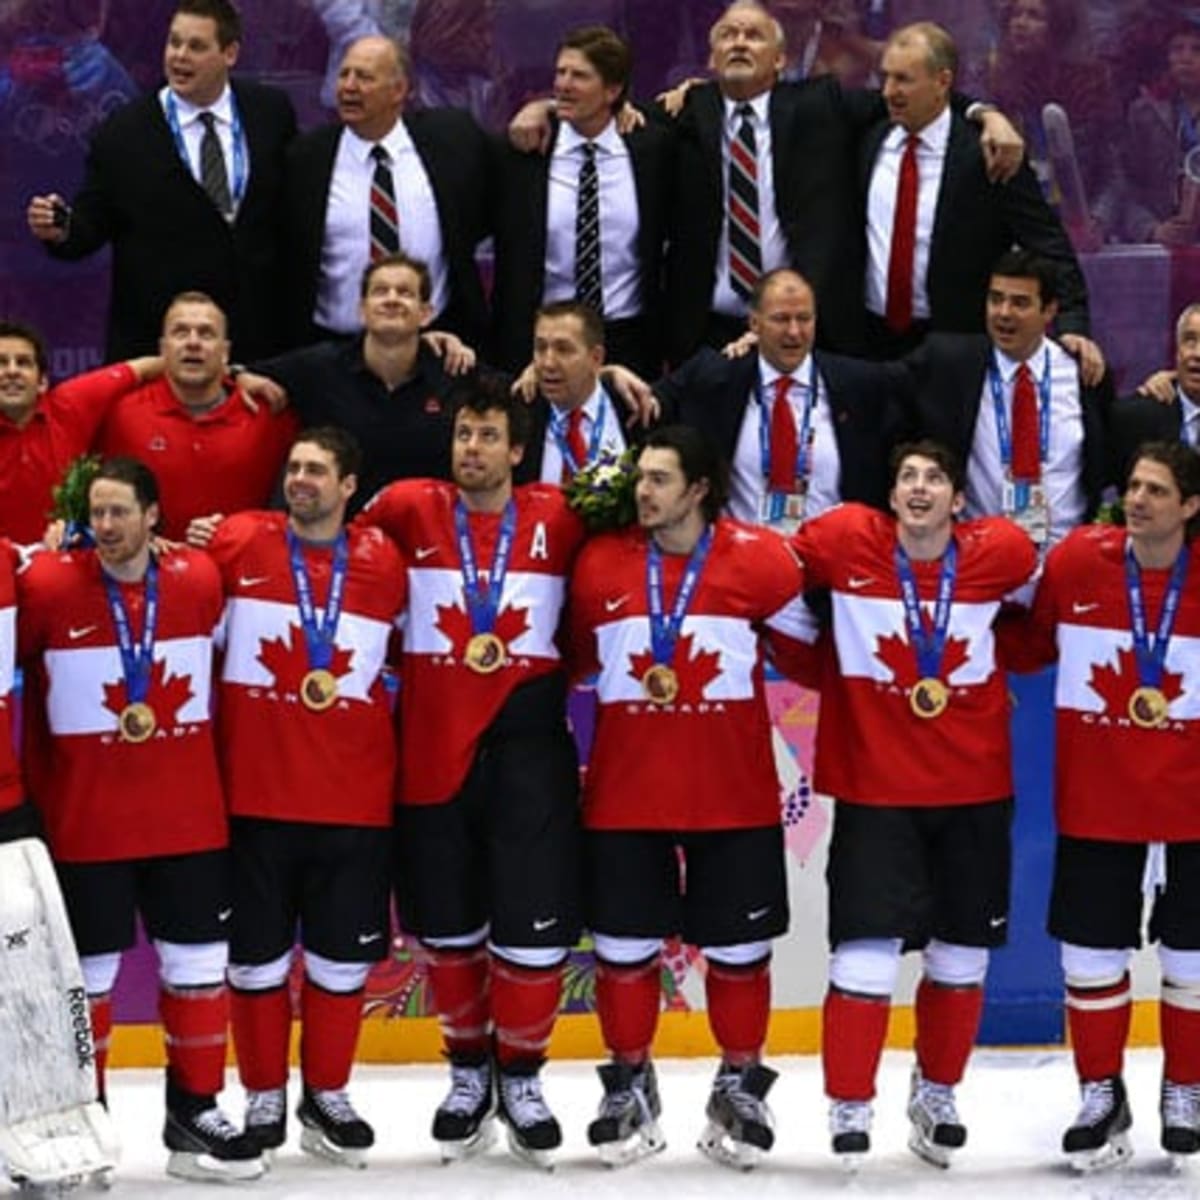 Team Canada to have third jersey at 2014 Olympics? 